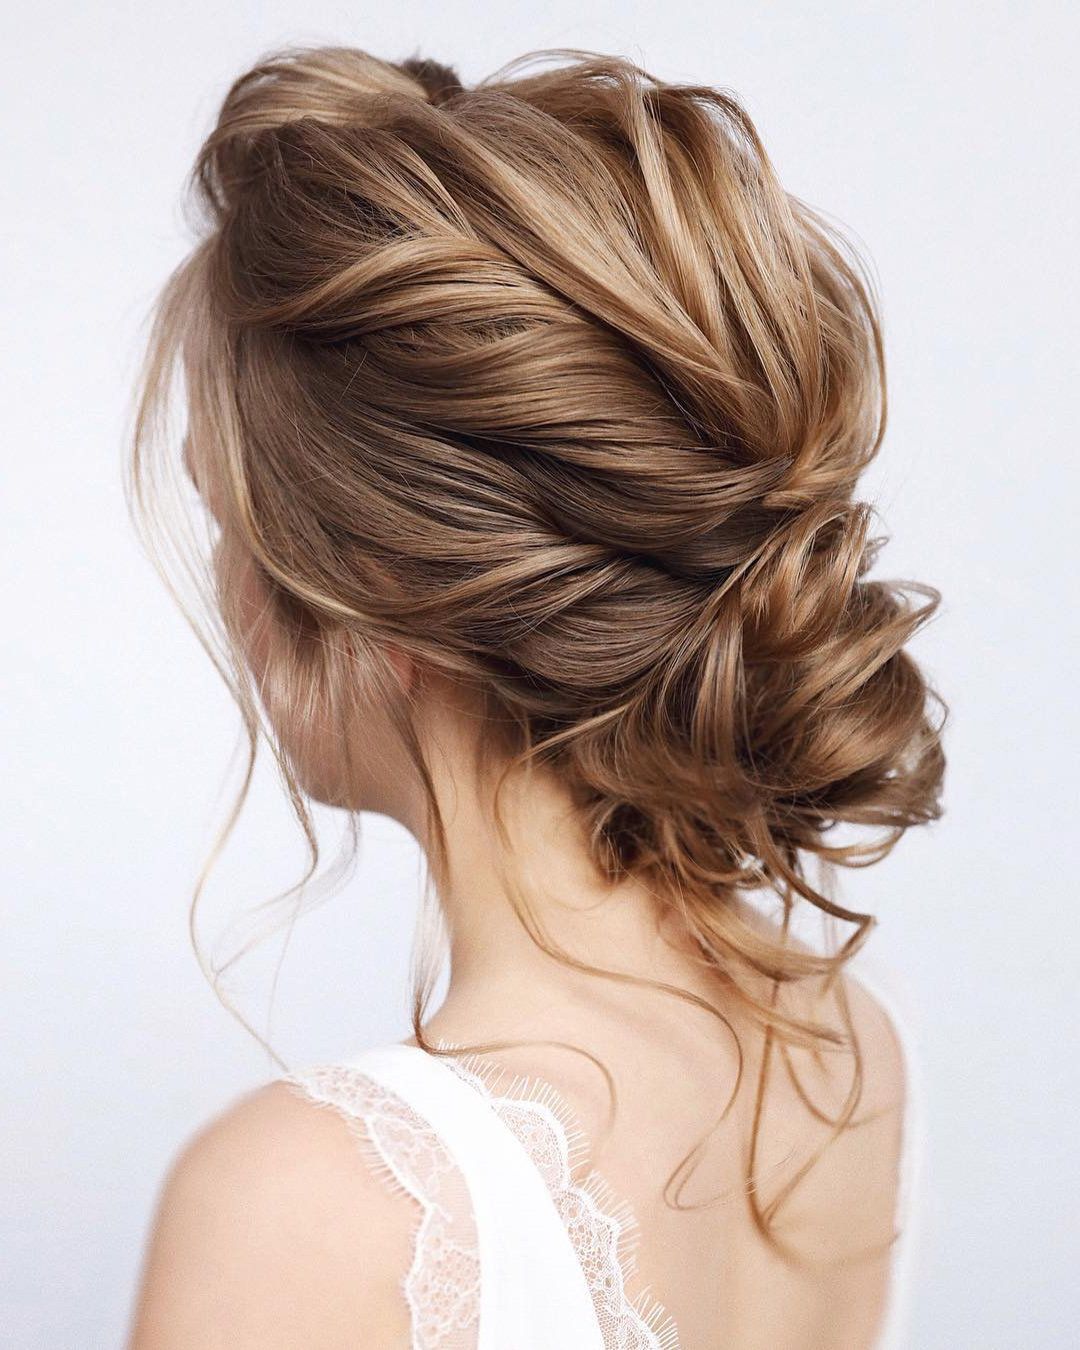 Wedding Hairstyles For Medium Length Hair: 40+ Best Looks Throughout 2017 Wavy Updos Hairstyles For Medium Length Hair (View 6 of 20)